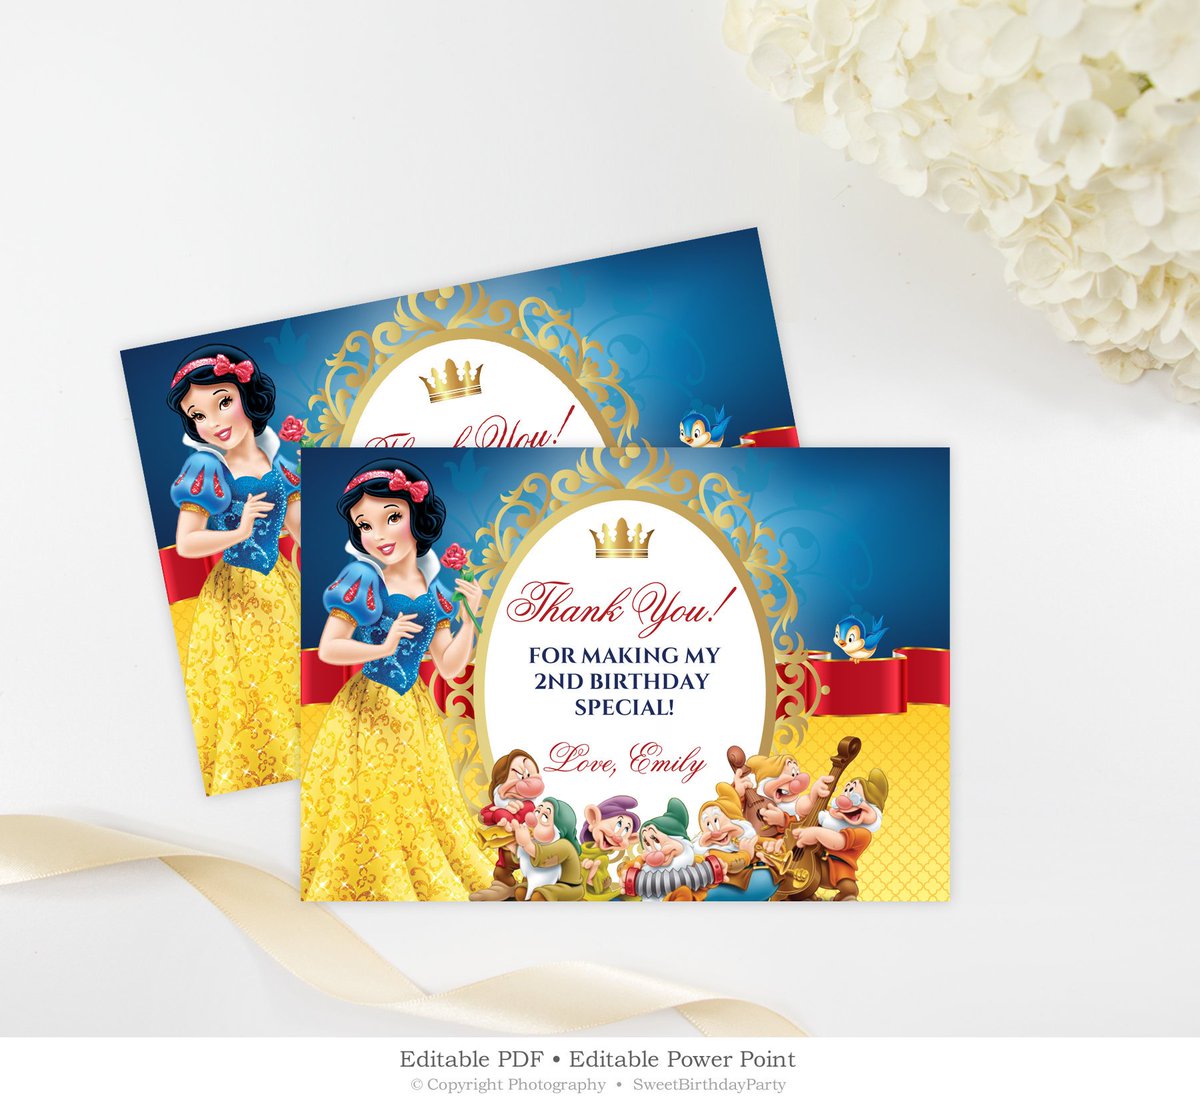 Violeta on Twitter: "Editable Birthday Thank You Card, Snow White Within Powerpoint Thank You Card Template